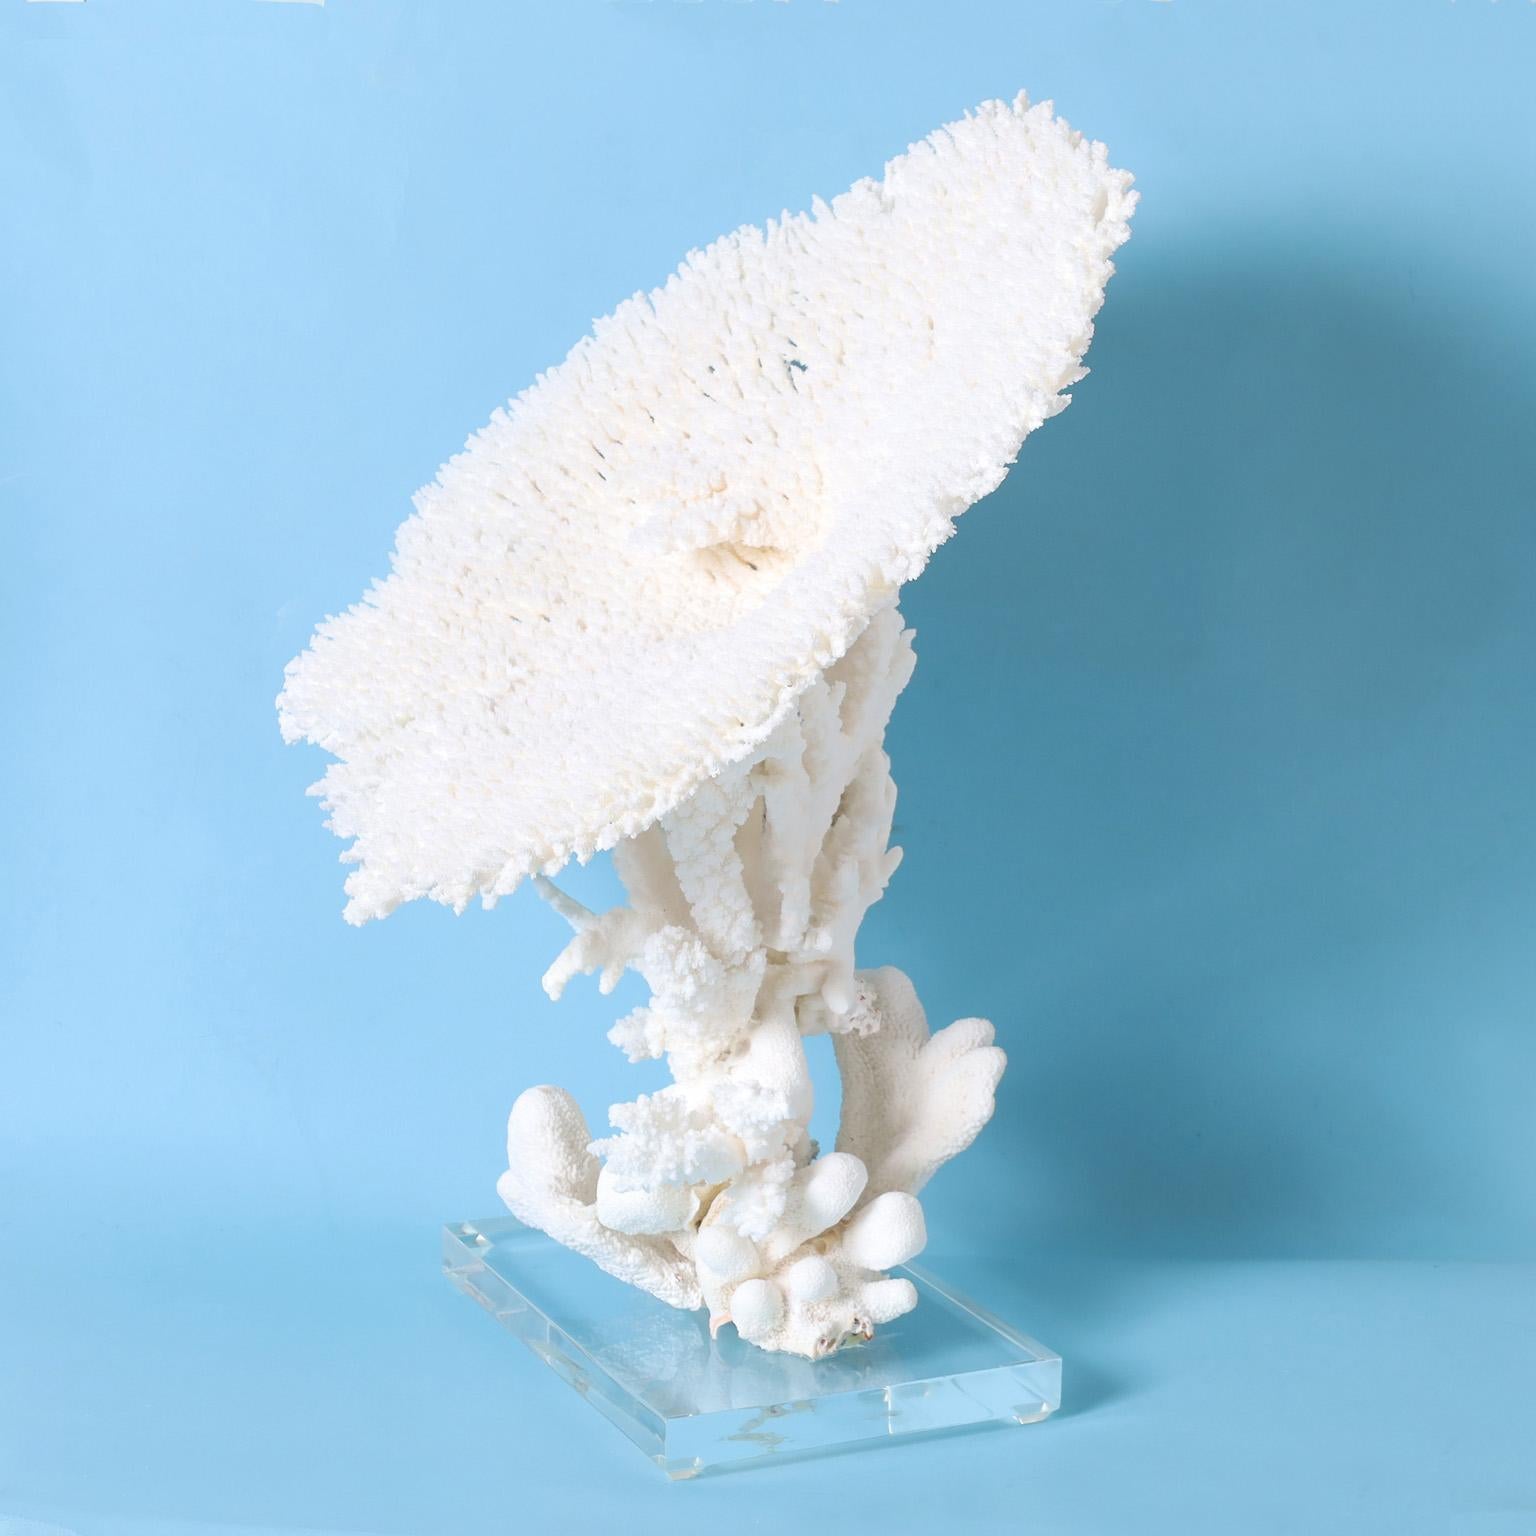 Impressive white coral assemblage using an exceptionally large table coral specimen with its sea inspired color and textures. Presented on a lucite base to enhance the sculptural elements.

Available only in the United States of America, shipping